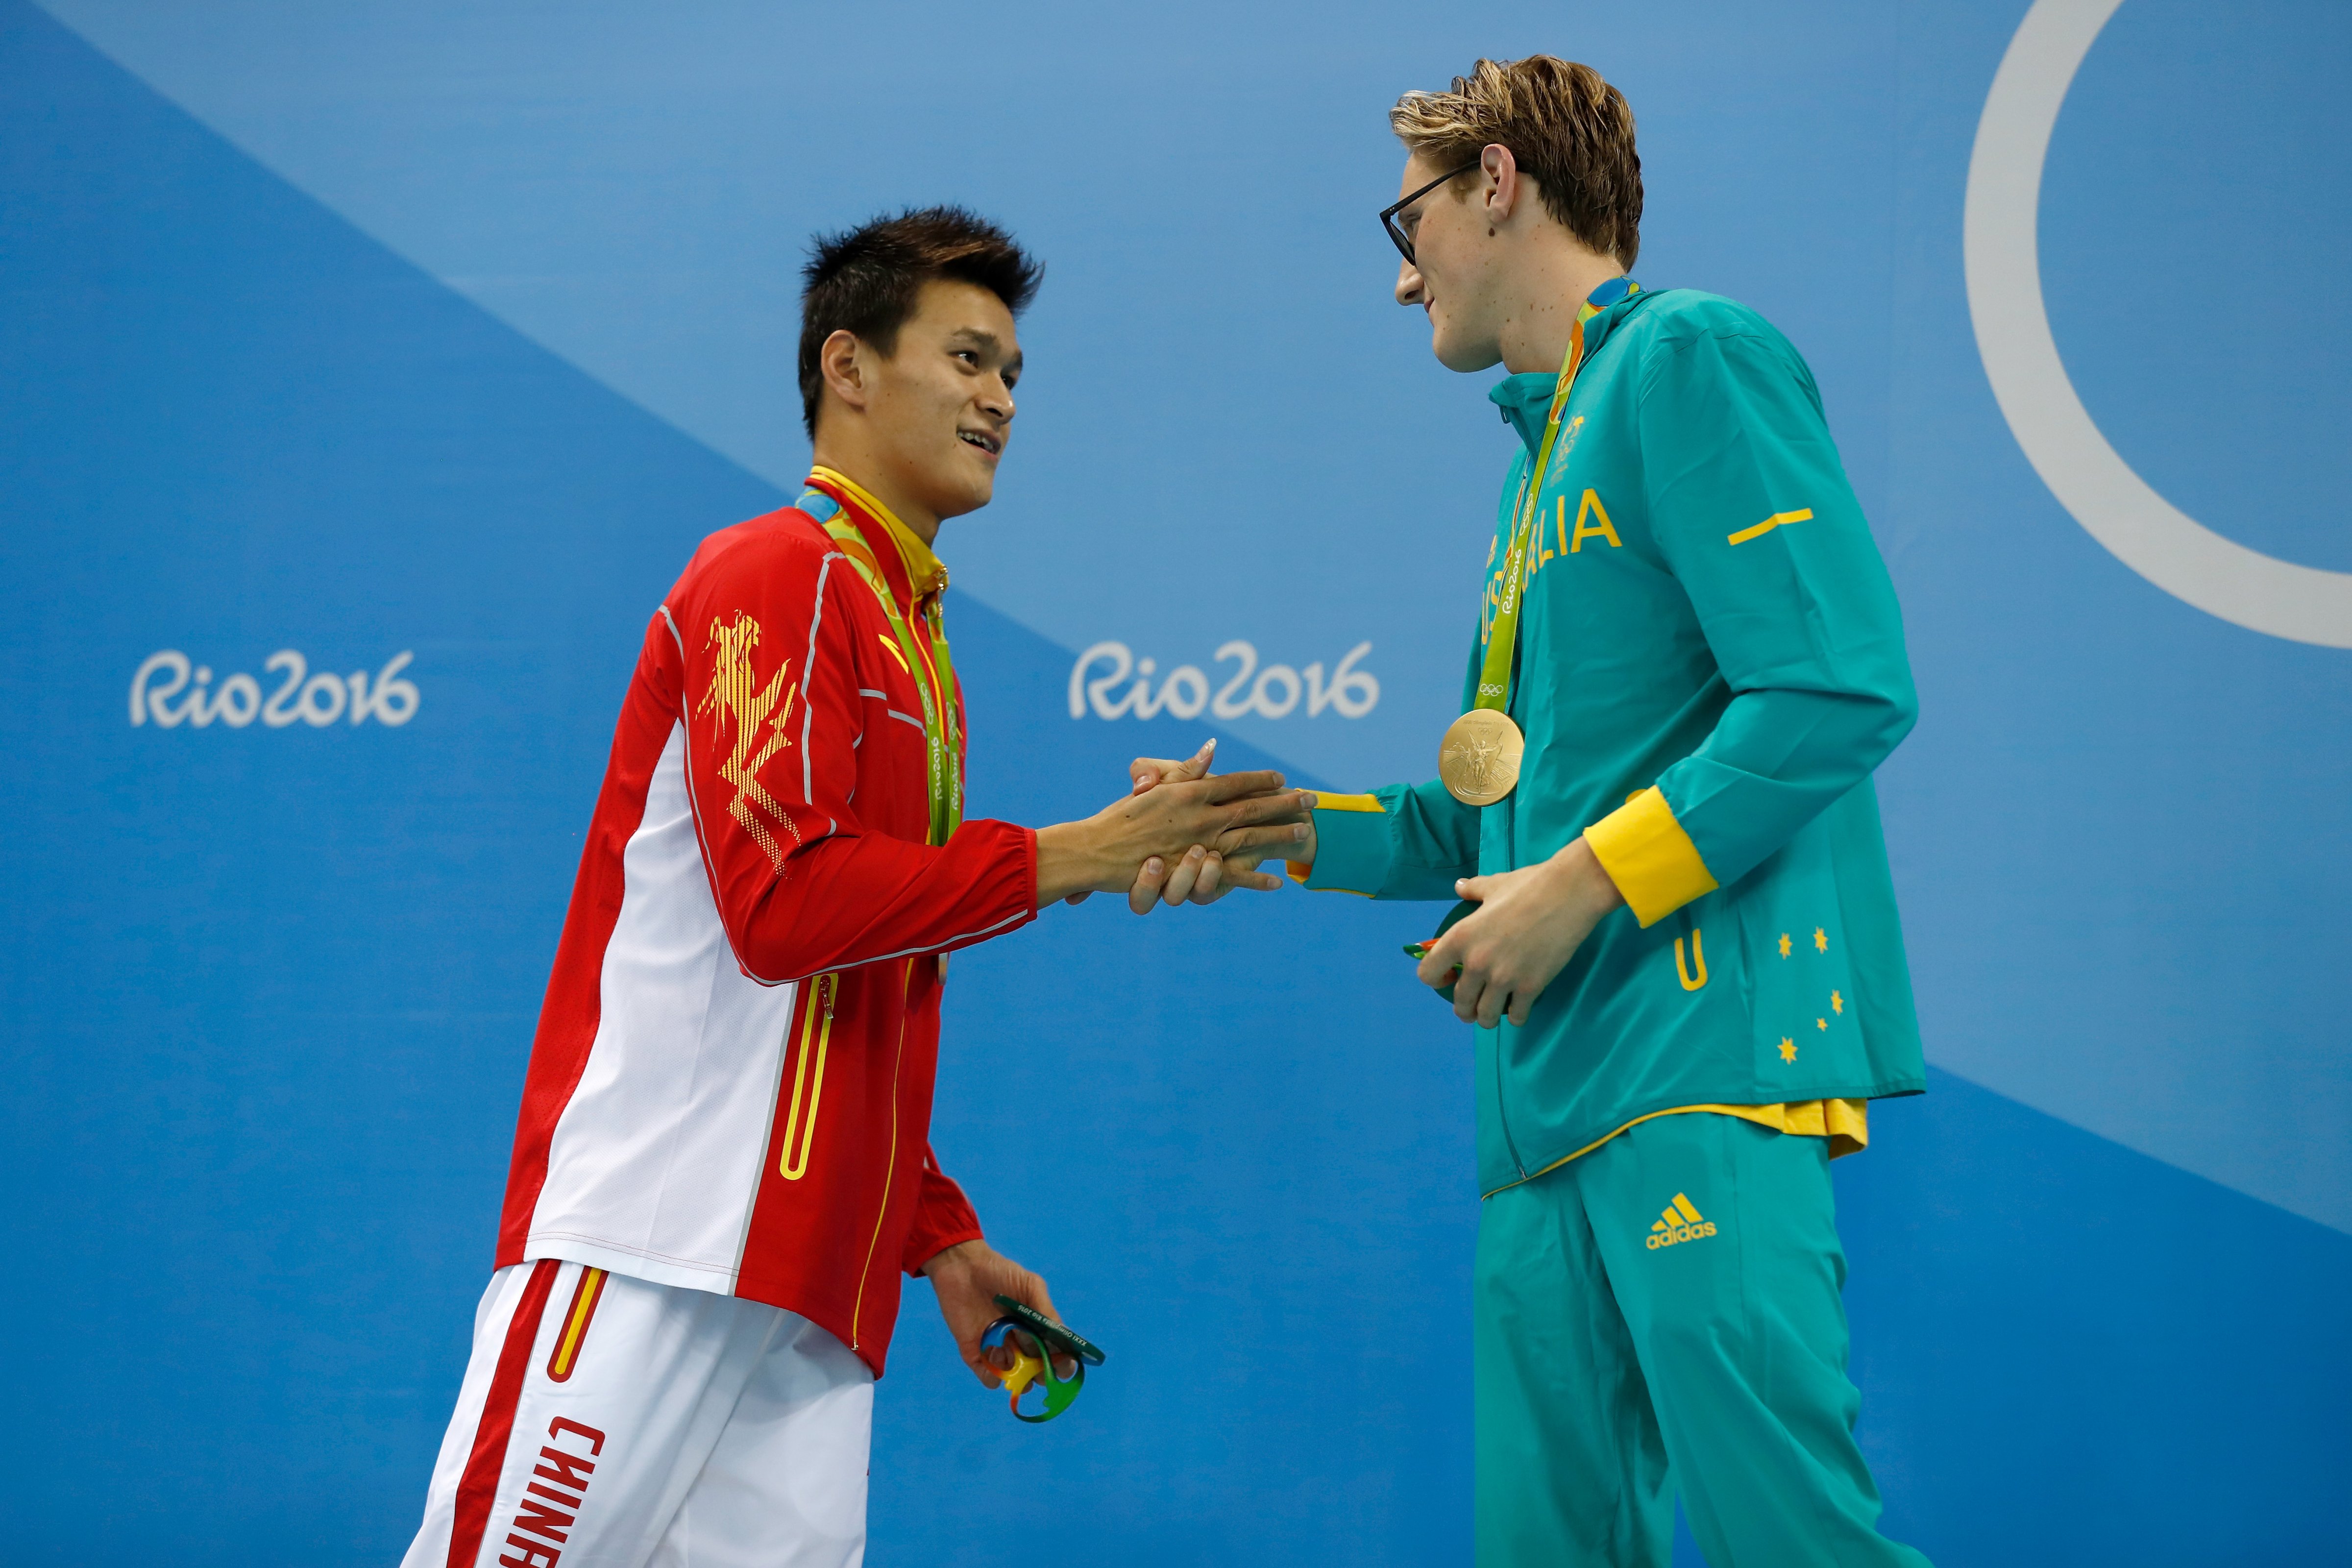 (L-R) Silver medalist Sun Yang of China and gold medal medallist Mack Horton of Australia pose during the medal ceremony for the Final of the Men's 400m Freestyle on Day 1 of the Rio 2016 Olympic Games at the Olympic Aquatics Stadium on August 6, 2016 in Rio de Janeiro, Brazil.